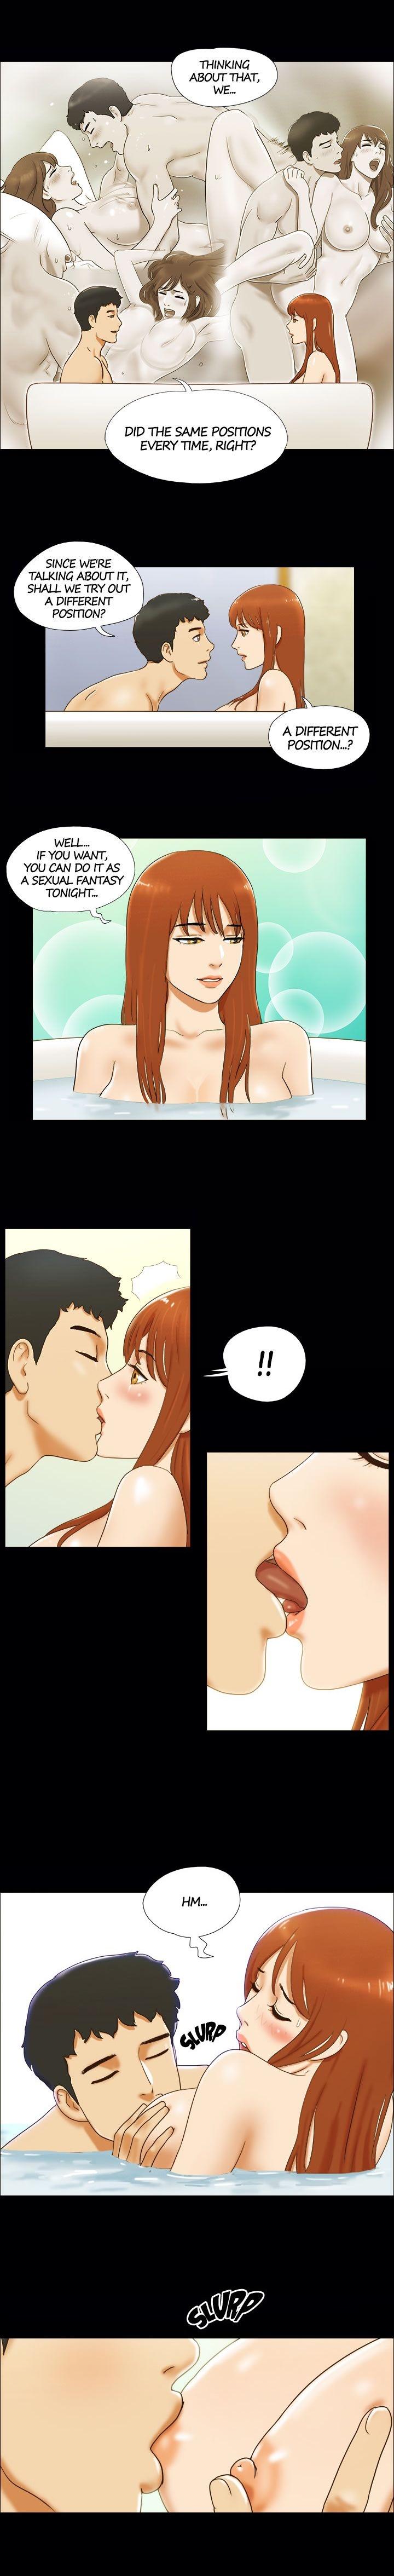 [Mulduck] Couple Game: 17 Sex Fantasies Ver.2 - Ch.21 - 40 [English] 95